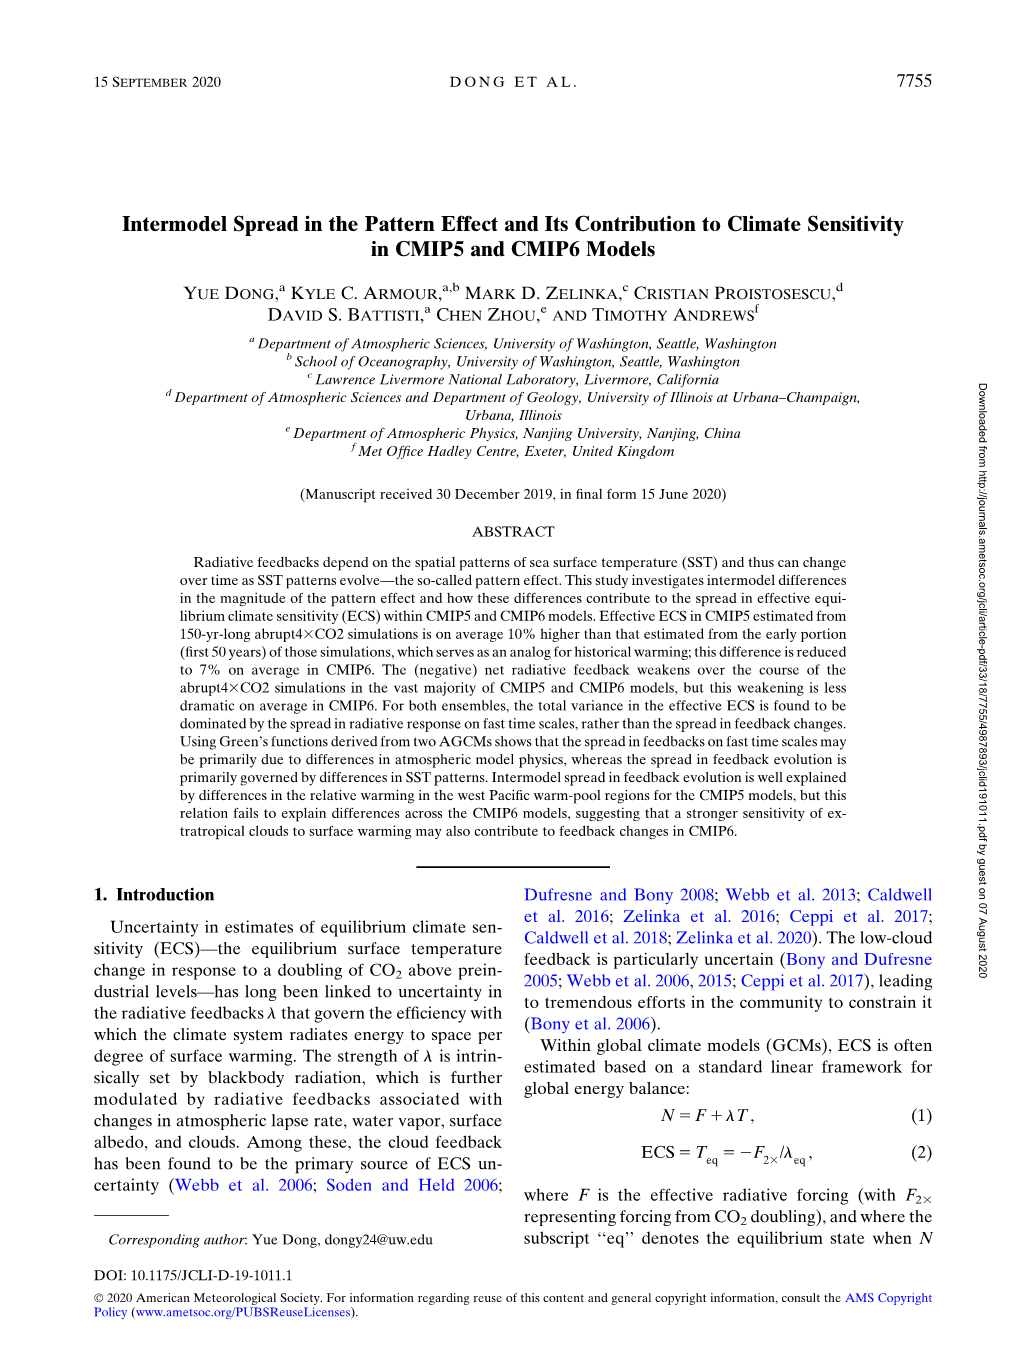 Intermodel Spread in the Pattern Effect and Its Contribution to Climate Sensitivity in CMIP5 and CMIP6 Models